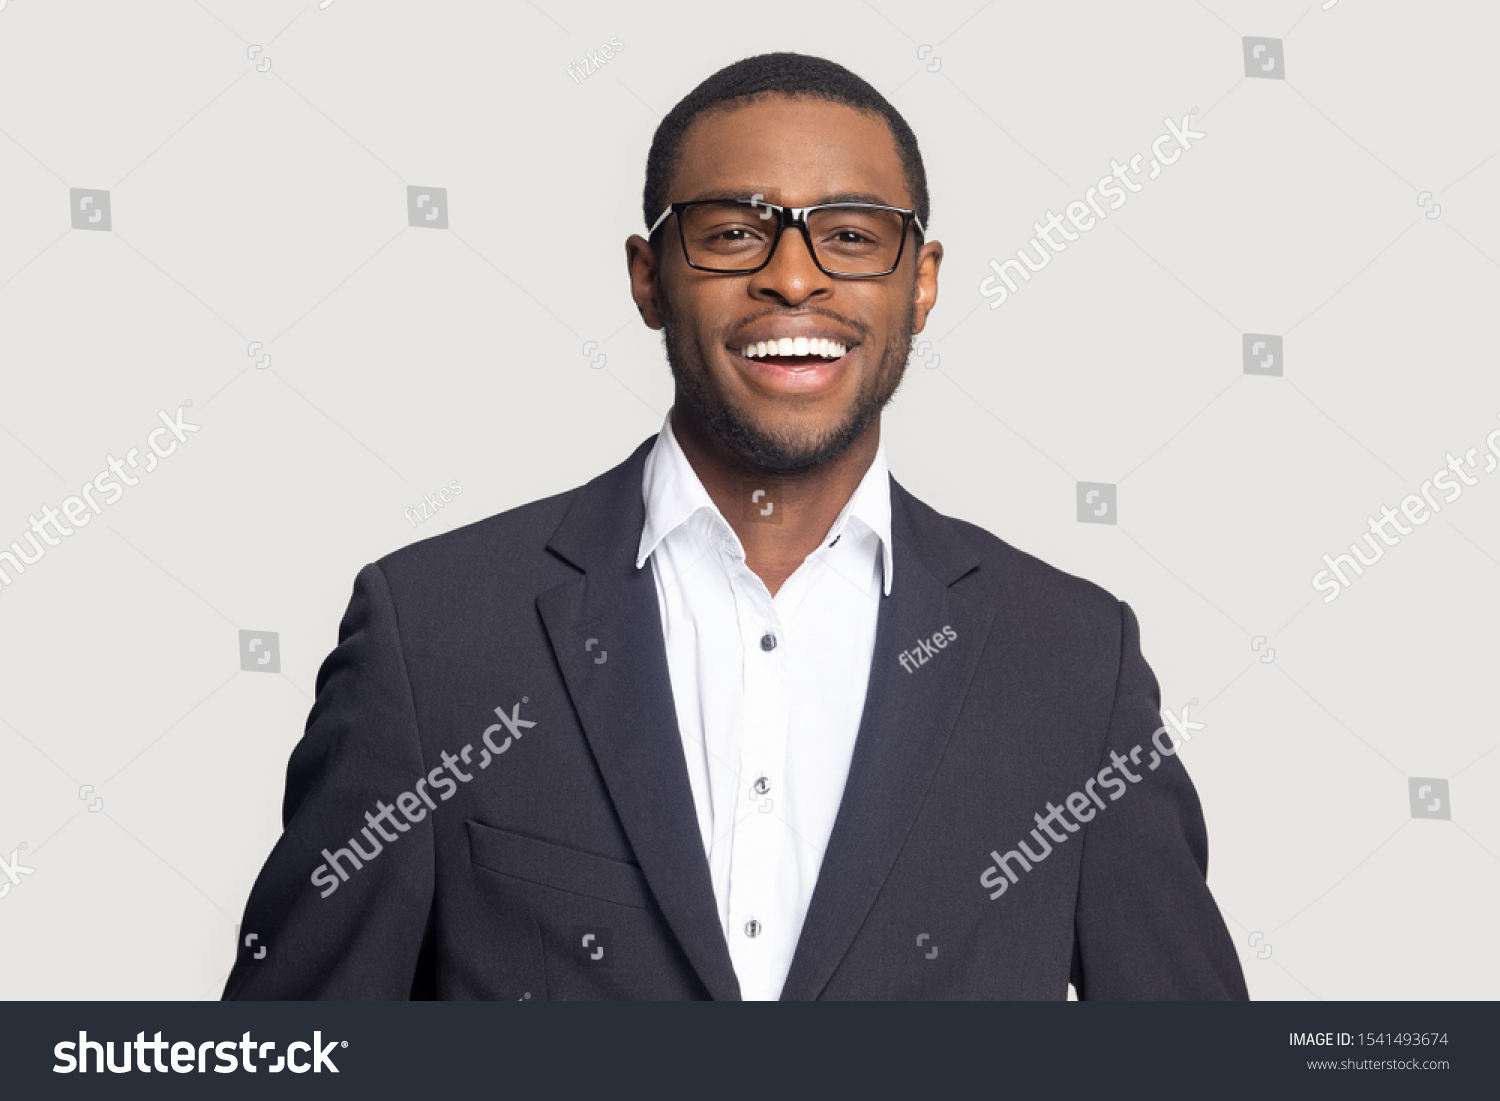 Head shot portrait close up smiling successful African American businessman looking at camera, laughing, excited man wearing formal suit and glasses isolated on grey studio background #1541493674